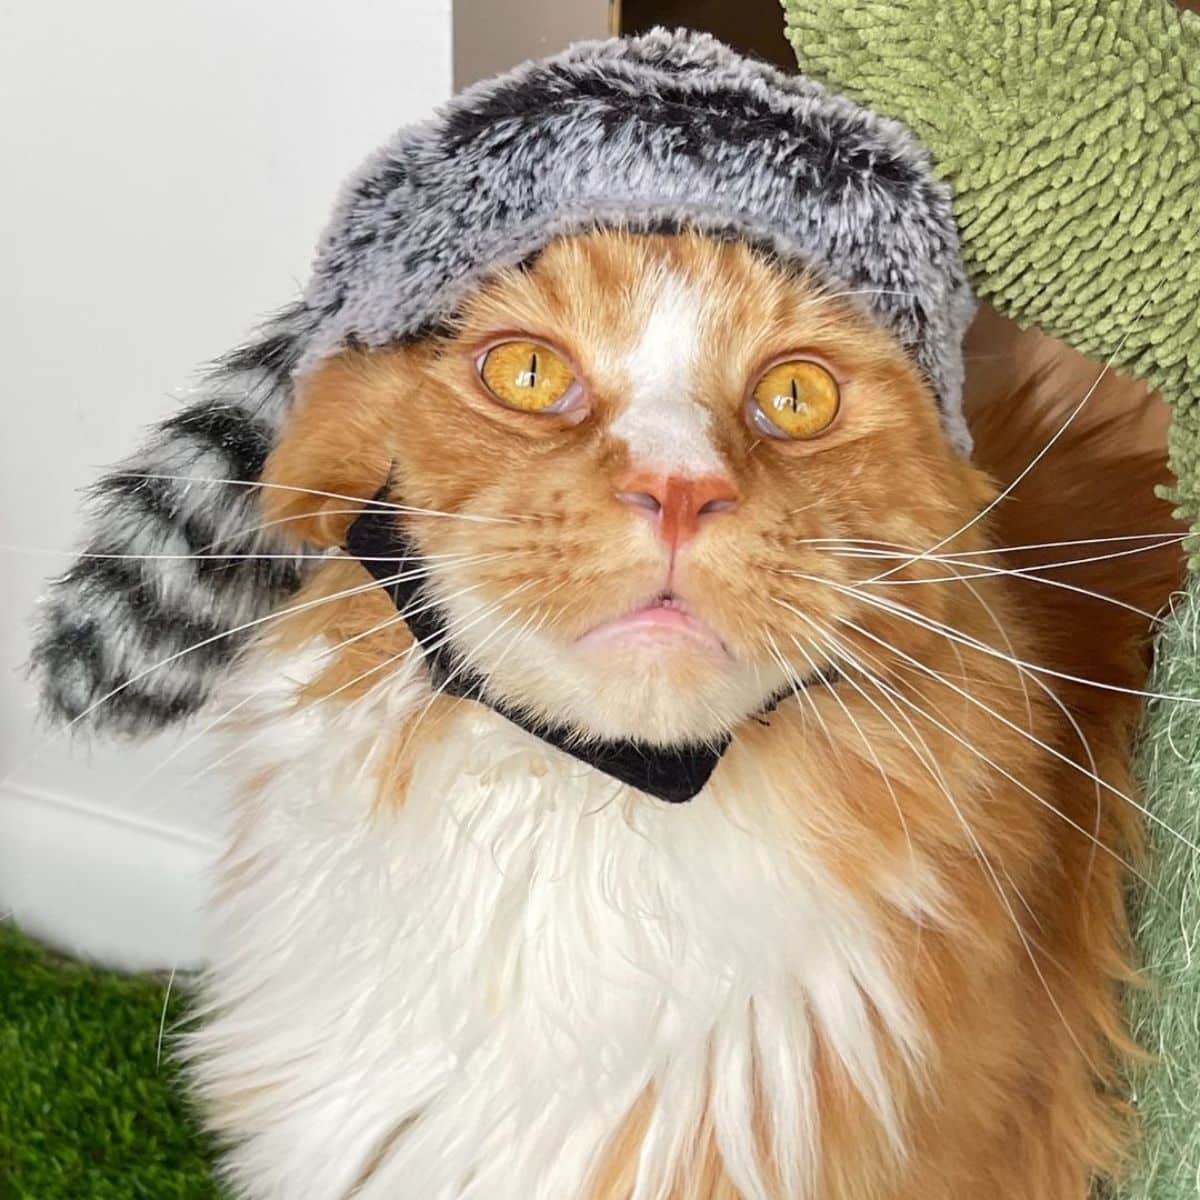 A ginger maine coon with a hat.